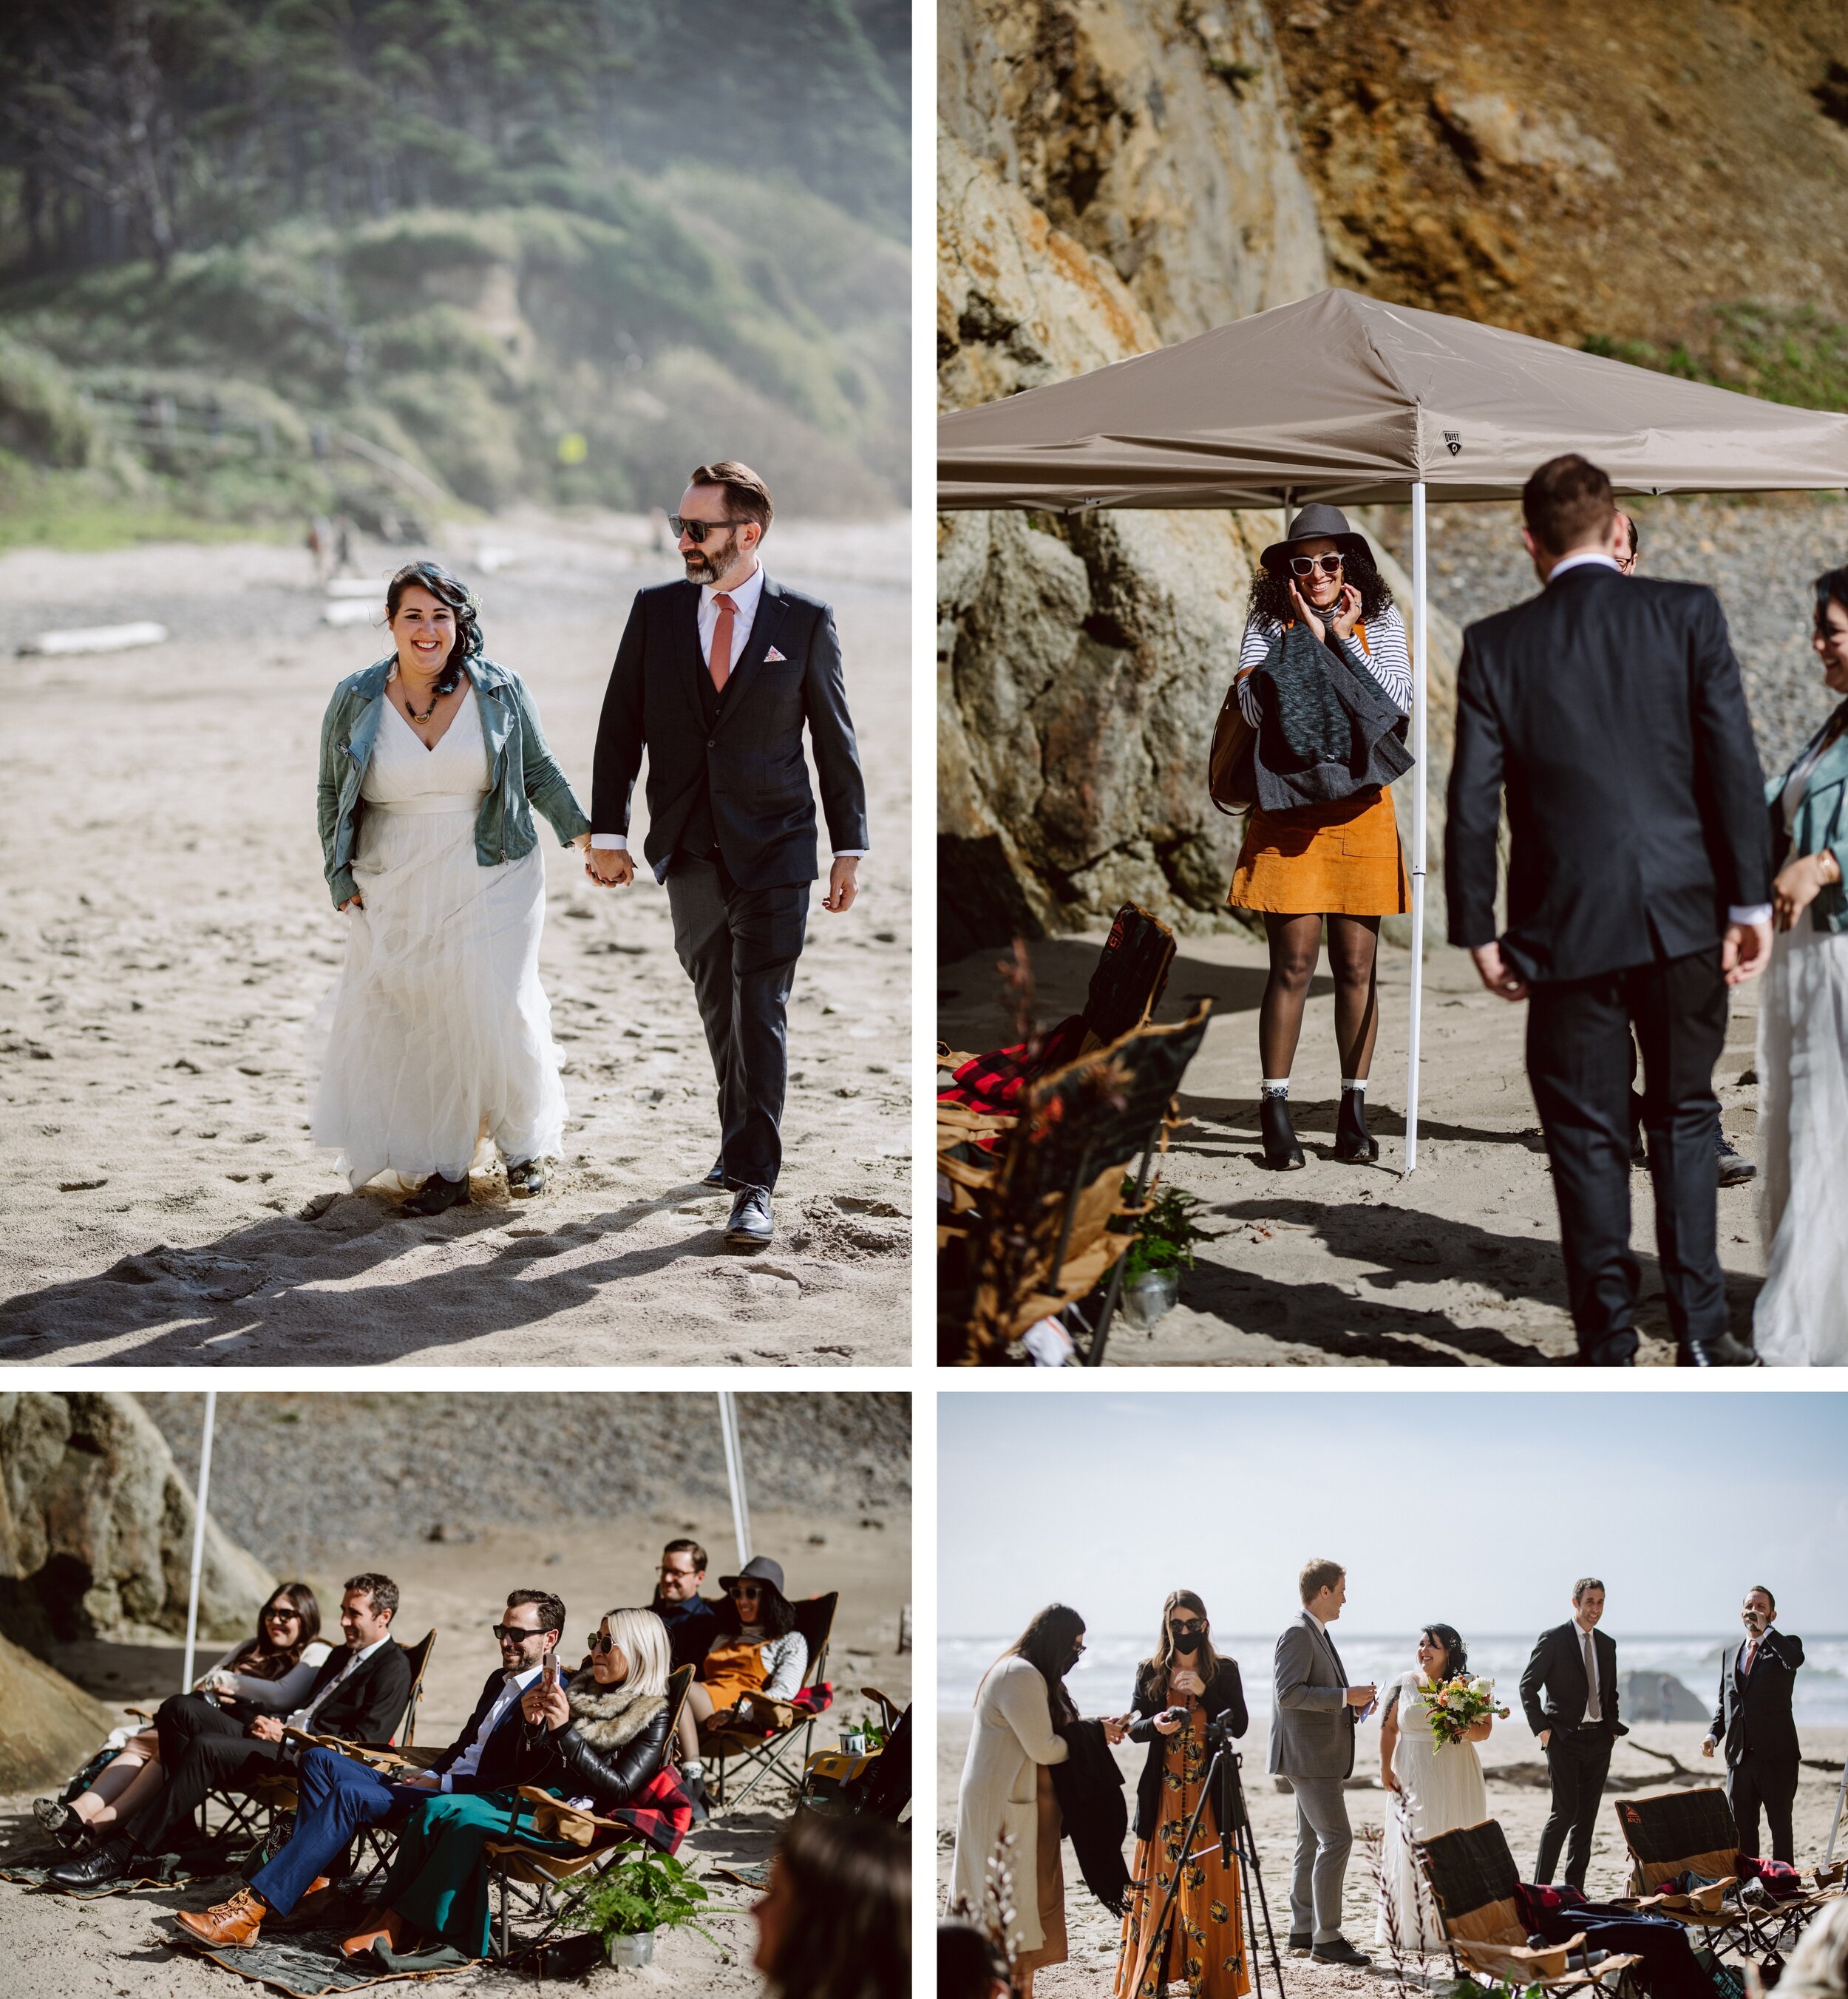 Bride and groom arrive at Hug Point beach for their elopement where a small group of friends greets them